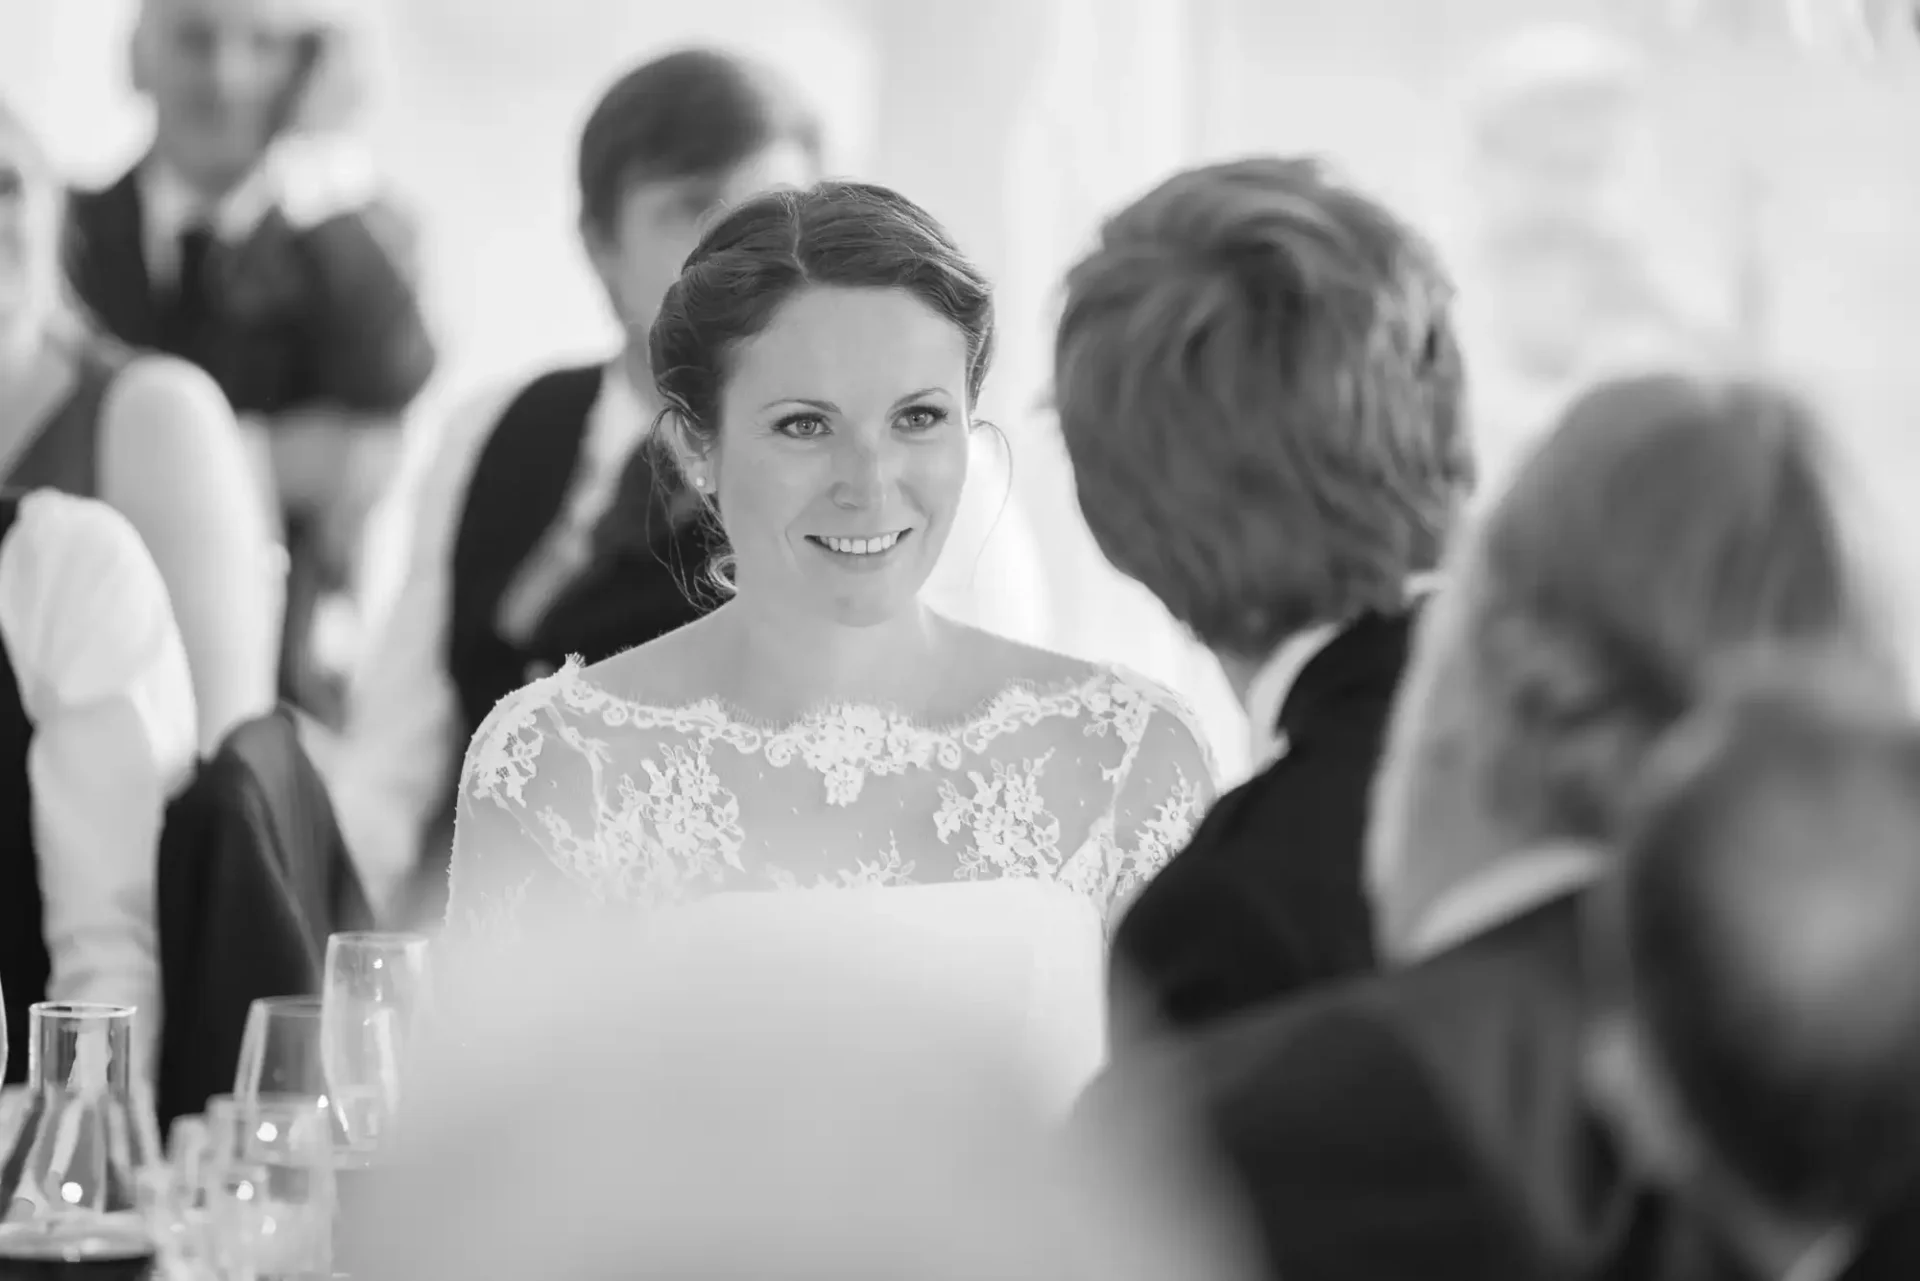 A bride in a lace dress smiling at a person across the table in a black-and-white photo of a wedding reception.